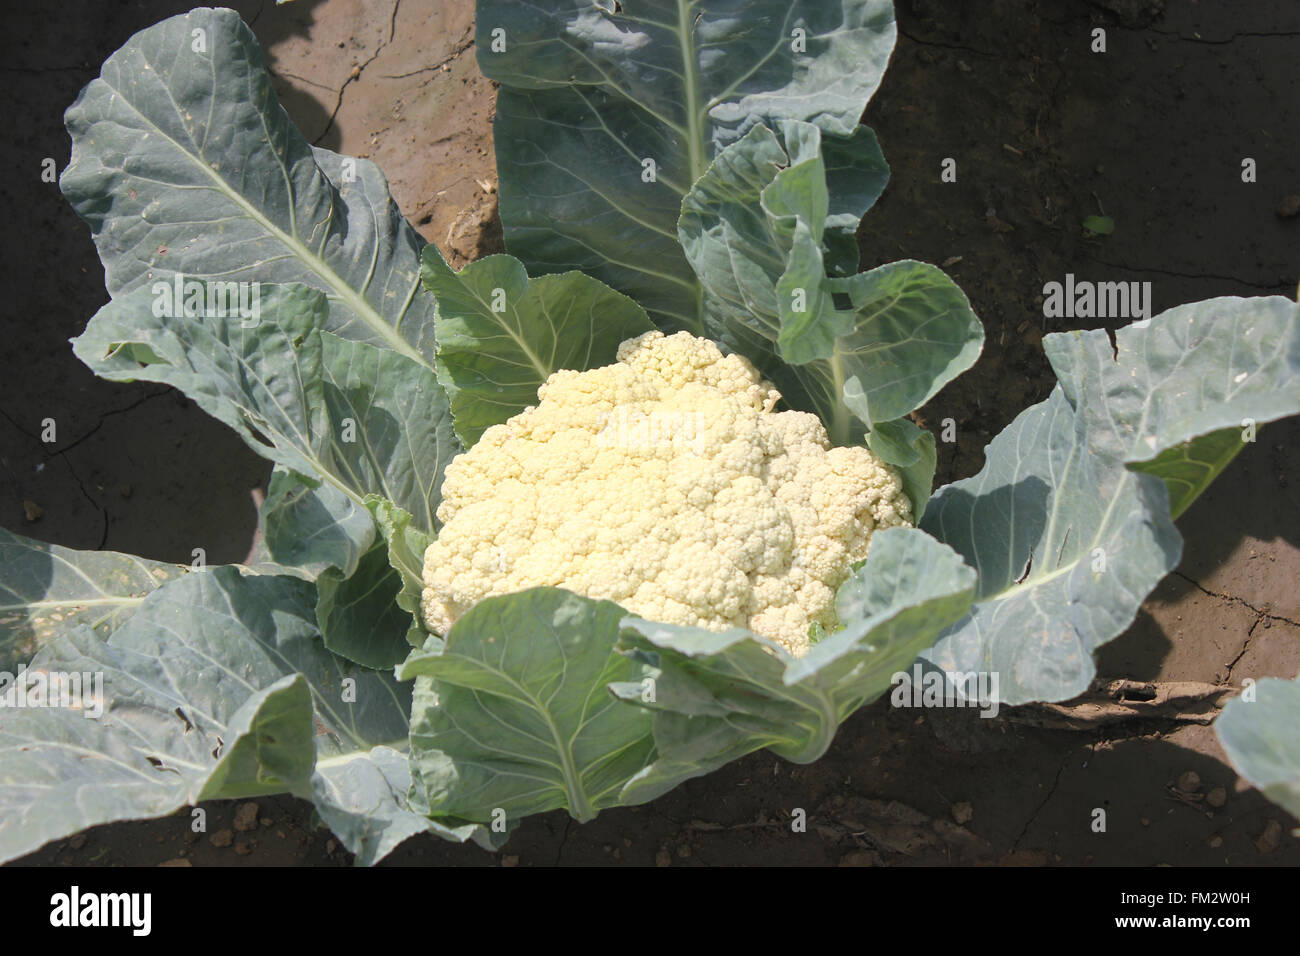 Brassica oleracea var. botrytis, PUSA Snowball cauliflower, late maturing cultivar  tropical climate, white rounded compact Stock Photo